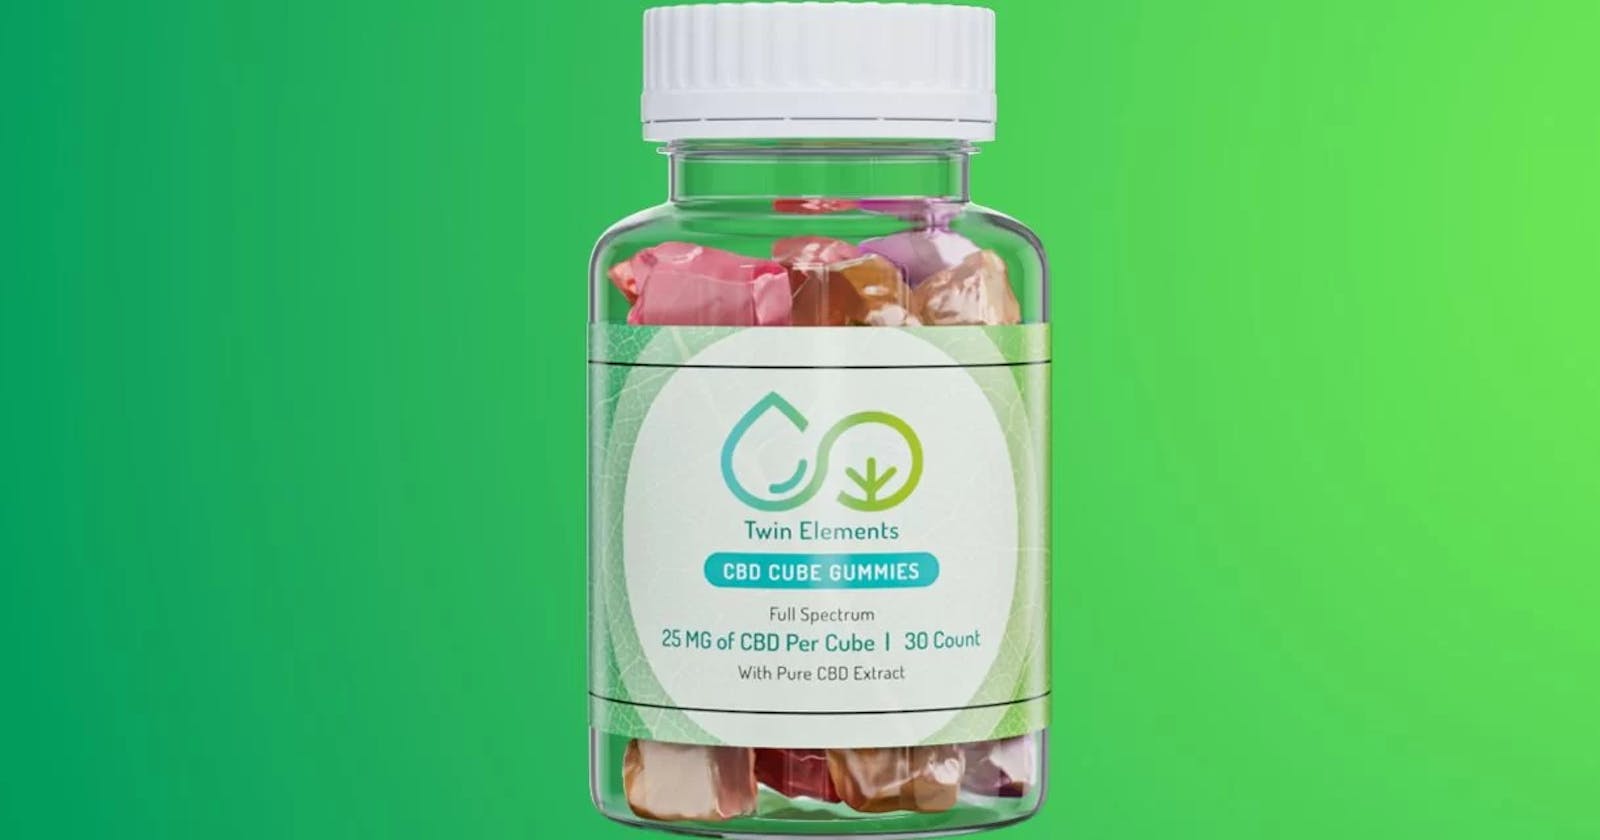 Twin Elements CBD Gummies Reviews: Real or Hoax Price and Website